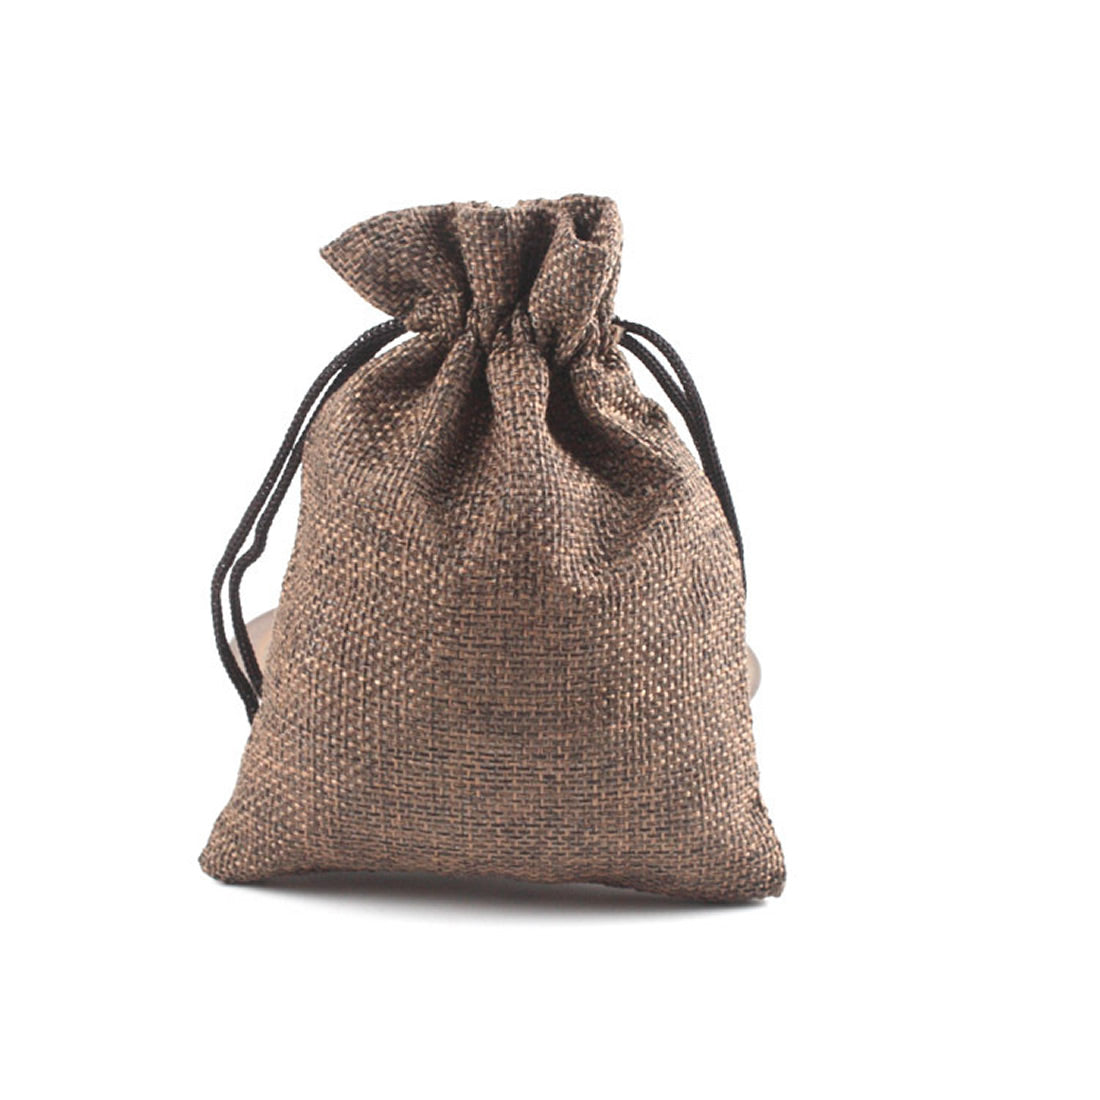 PK/10 - Deep Coffee - COTTON #5 BAGS 5 x 7 inch - with Draw String